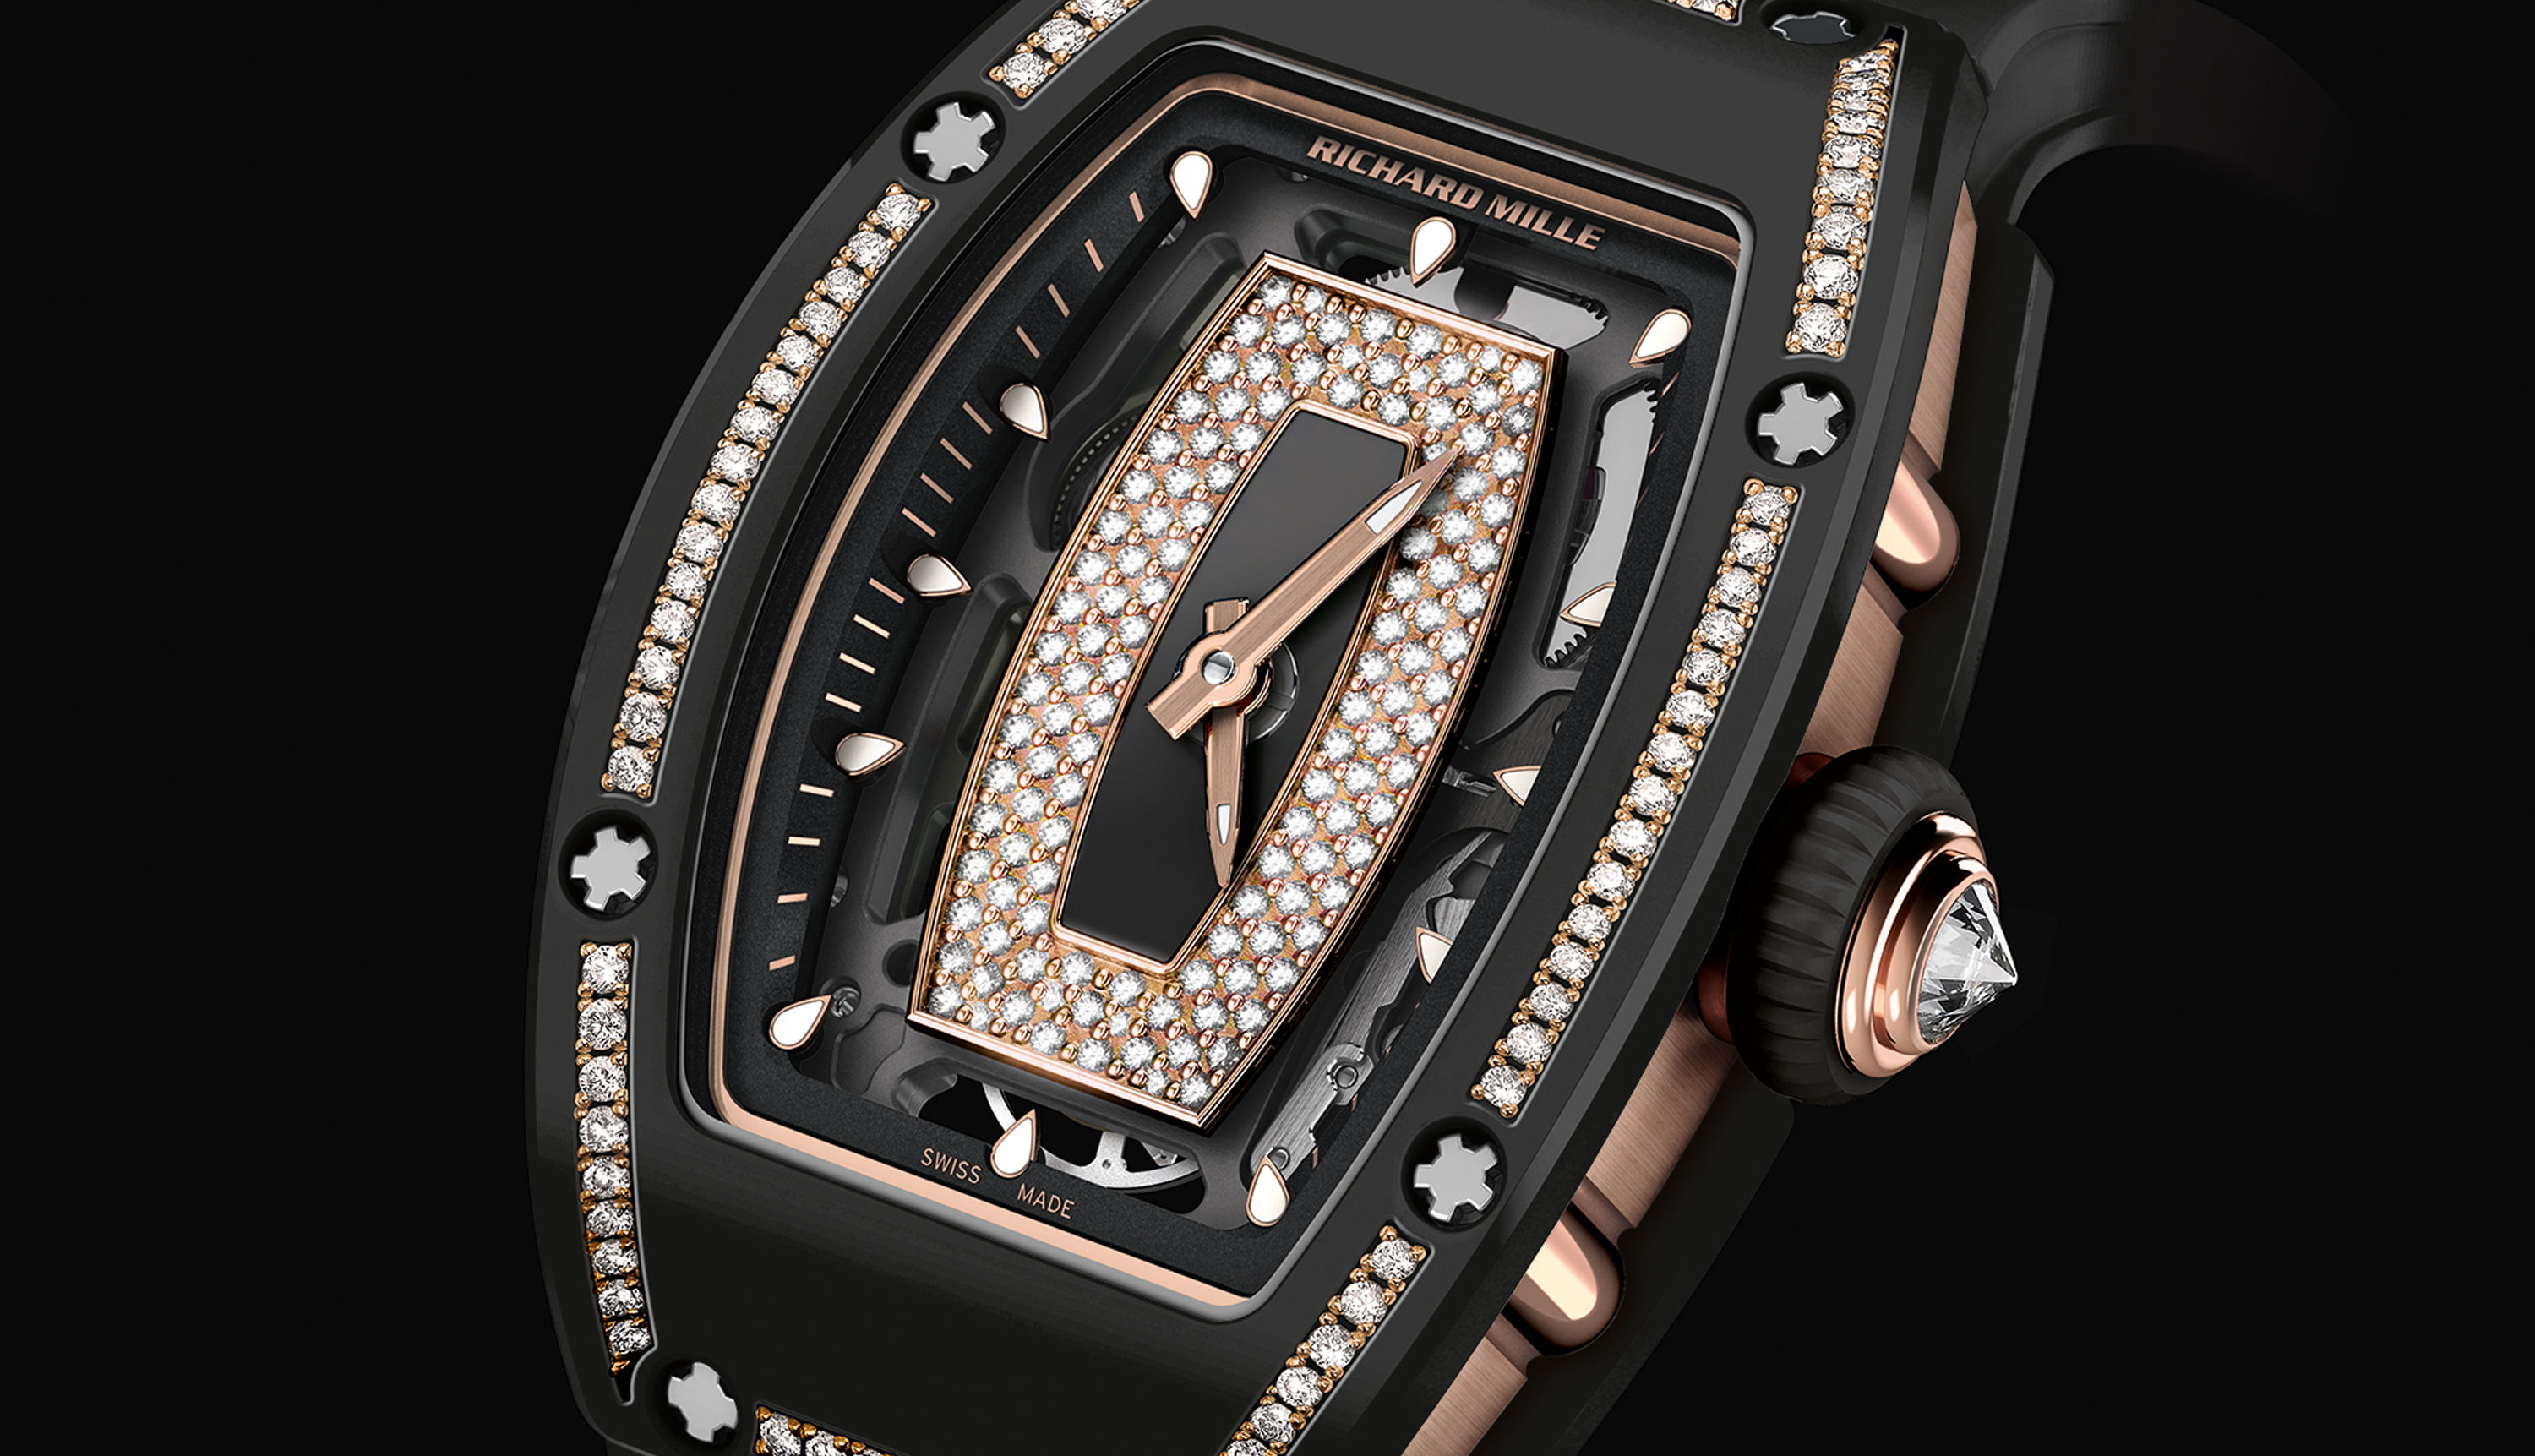 Richard Mille just unveiled a spectacular ladies’ timepiece ahead of SIHH 2018